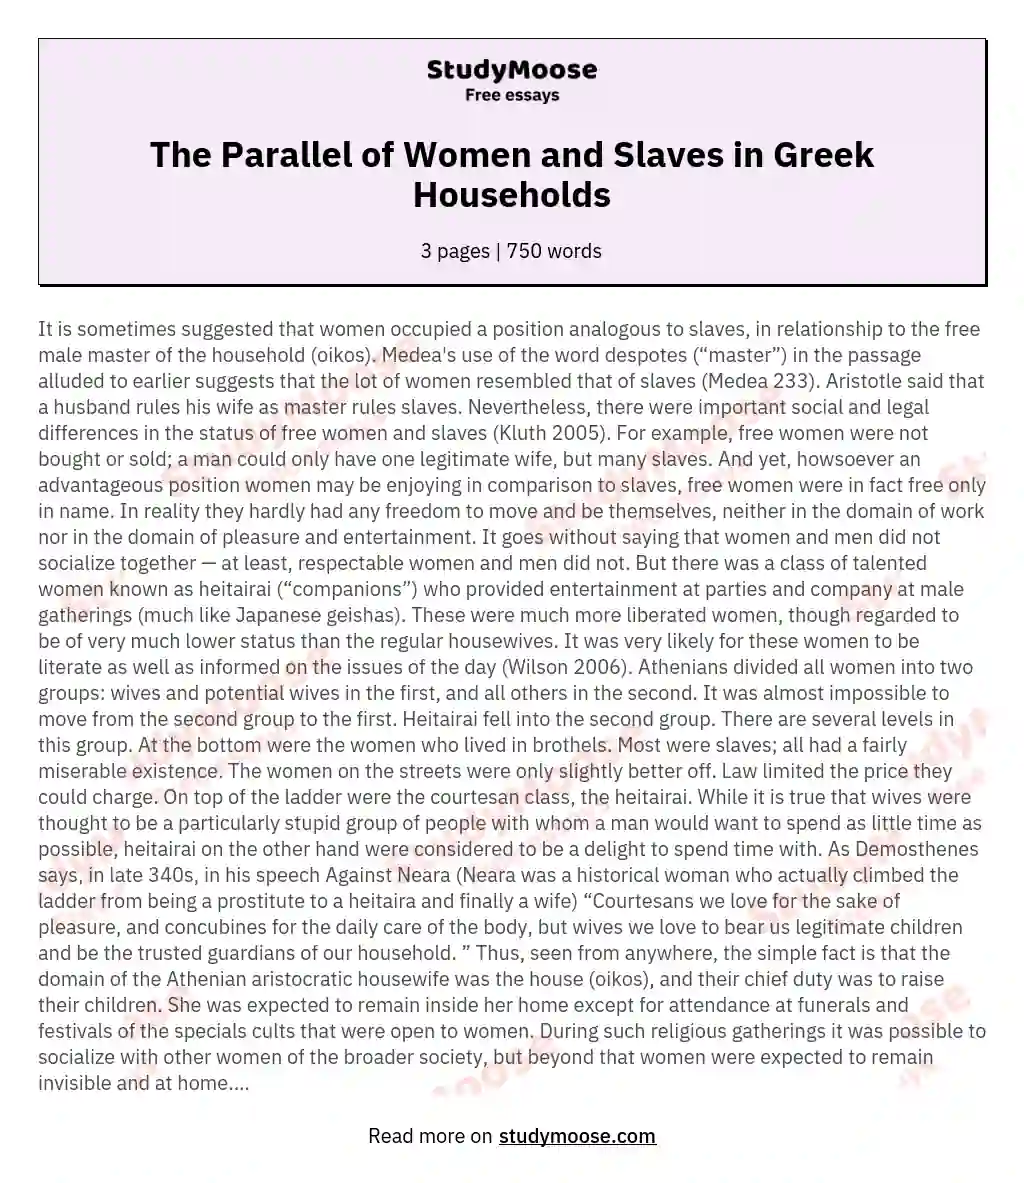 The Parallel of Women and Slaves in Greek Households essay